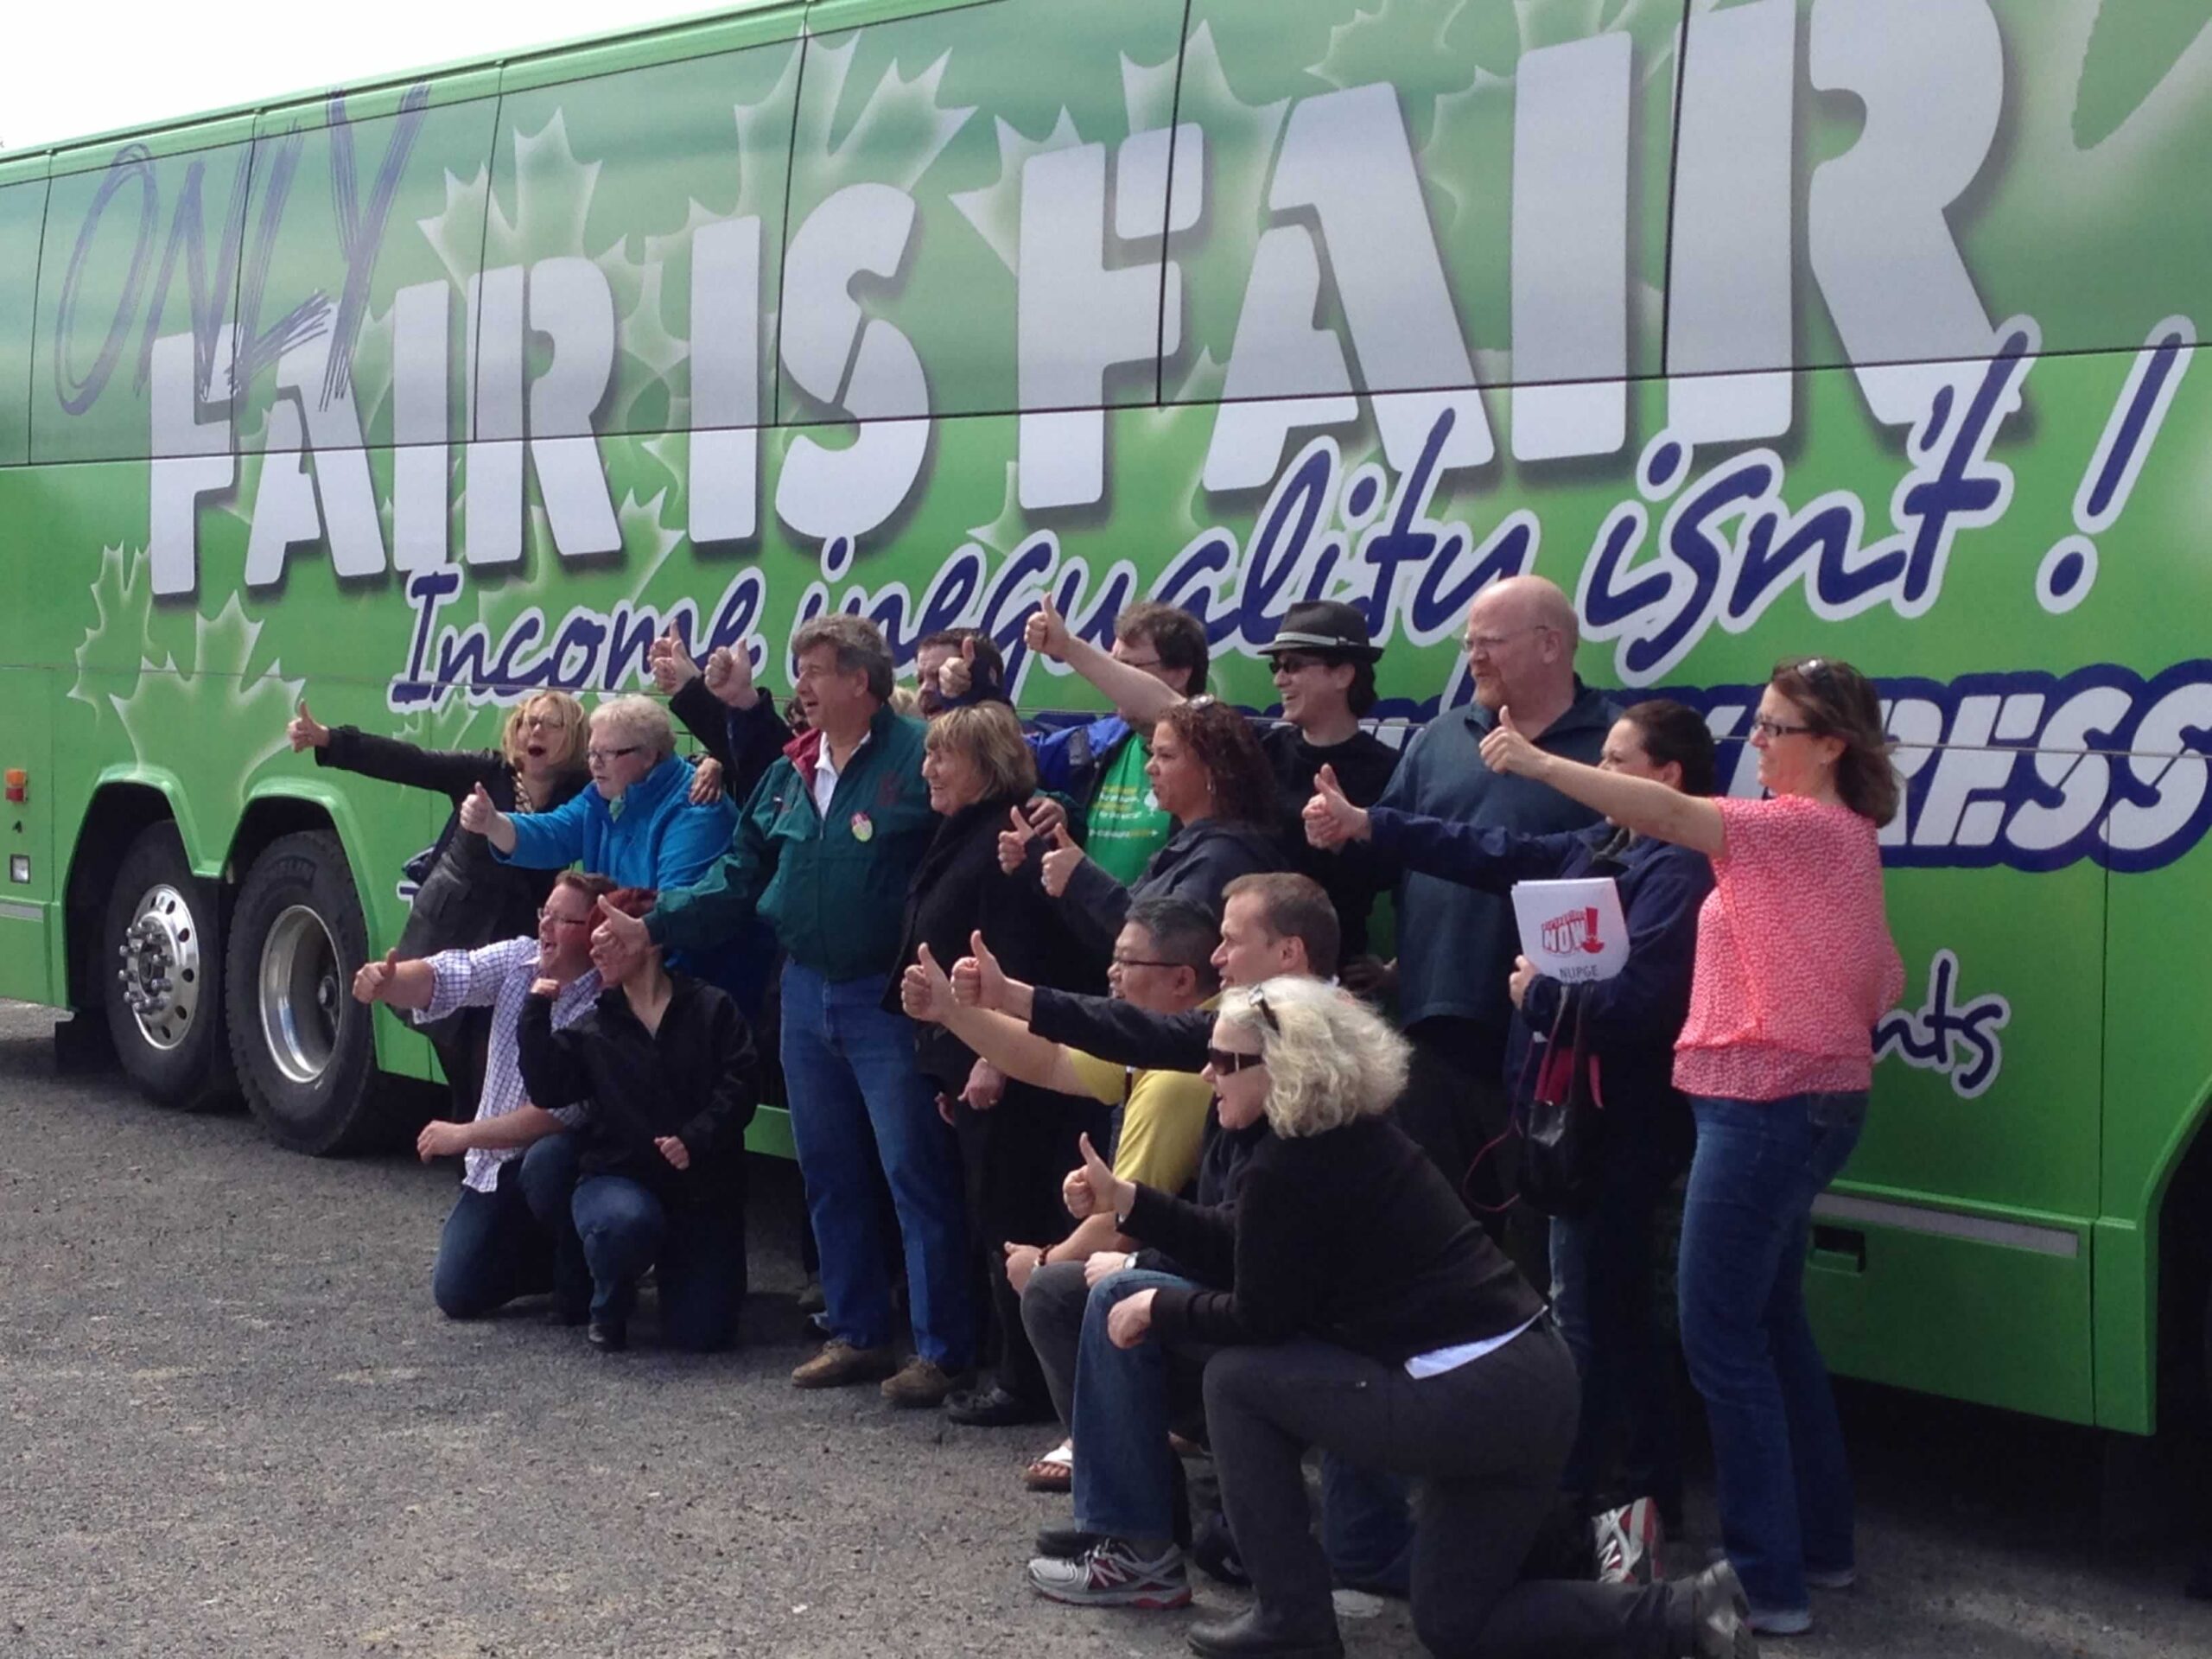 OPSEU members posing in front of a bus that says: Only fair is fair!